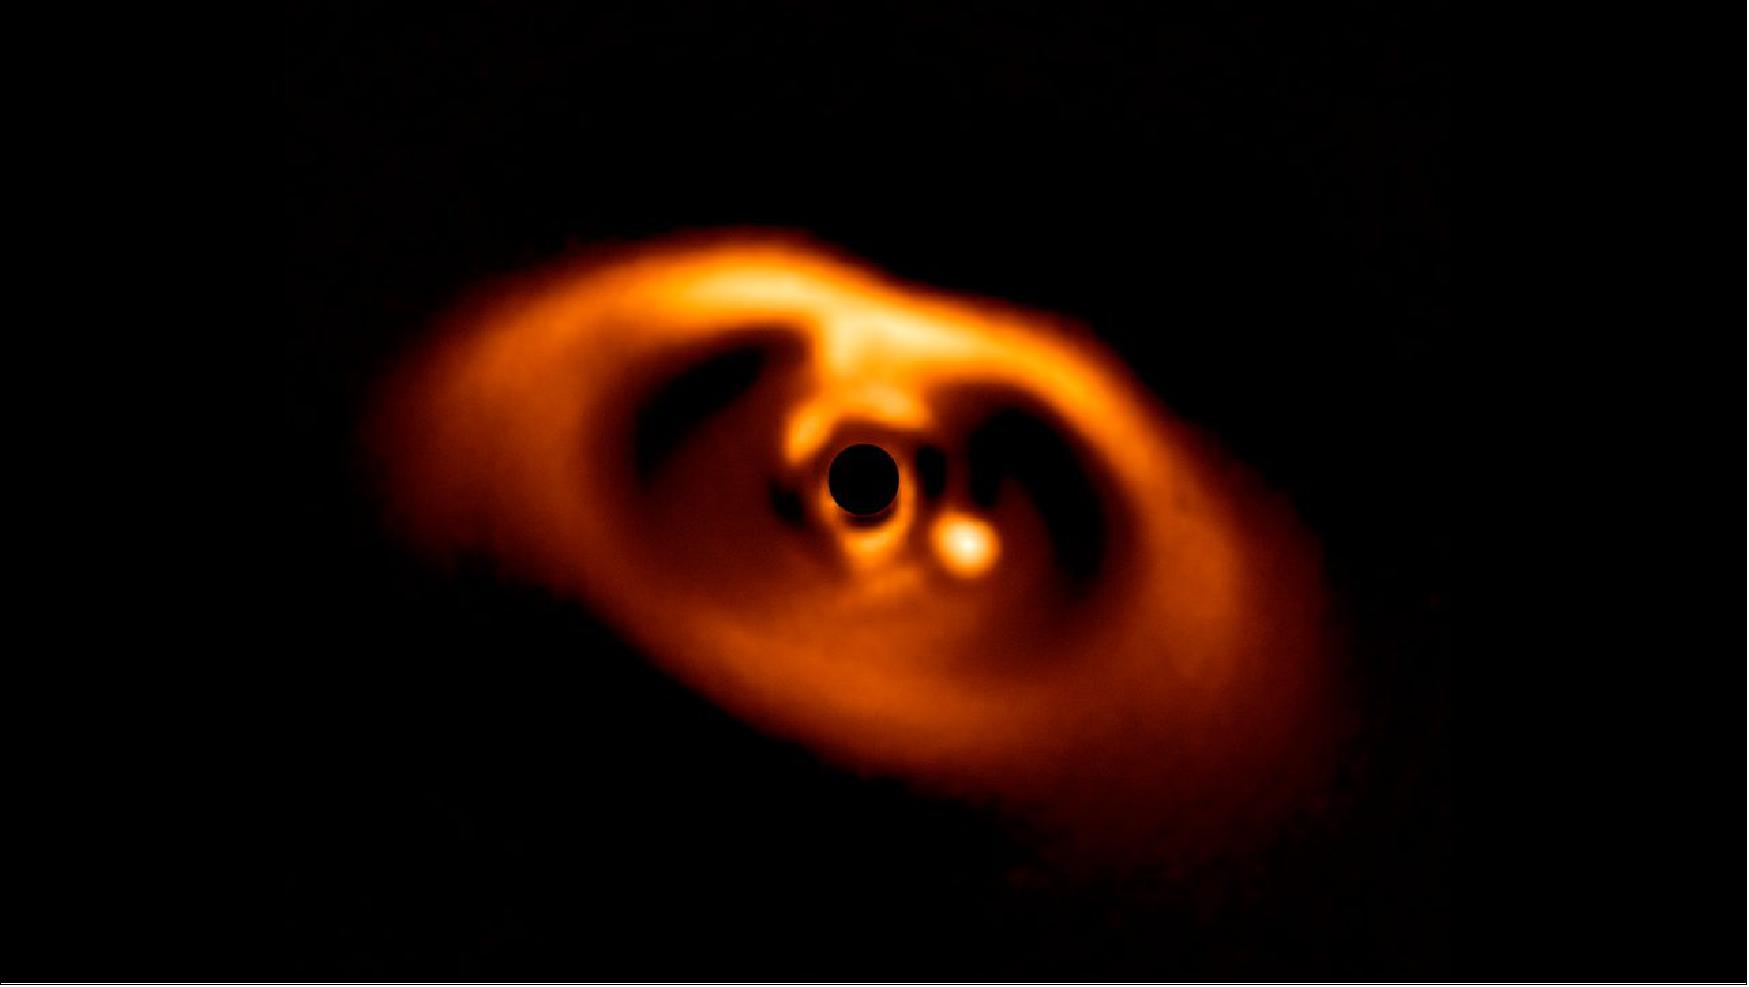 Figure 21: Protoplanetary Disk Around the Dwarf Star PDS 70. PDS 70 is approximately 370 light-years away and features a large gap in its inner ring. The European Southern Observatory's Very Large Telescope provided the first clear image of a planet forming around the central star in 2018. The planet is a bright point to the right of the center of the image. The central star is black since its light was blocked by an instrument known as a coronagraph. A second planet has also been detected. This system is a future target of NASA’s James Webb Space Telescope (image credit: ESO/A. Müller et al.)